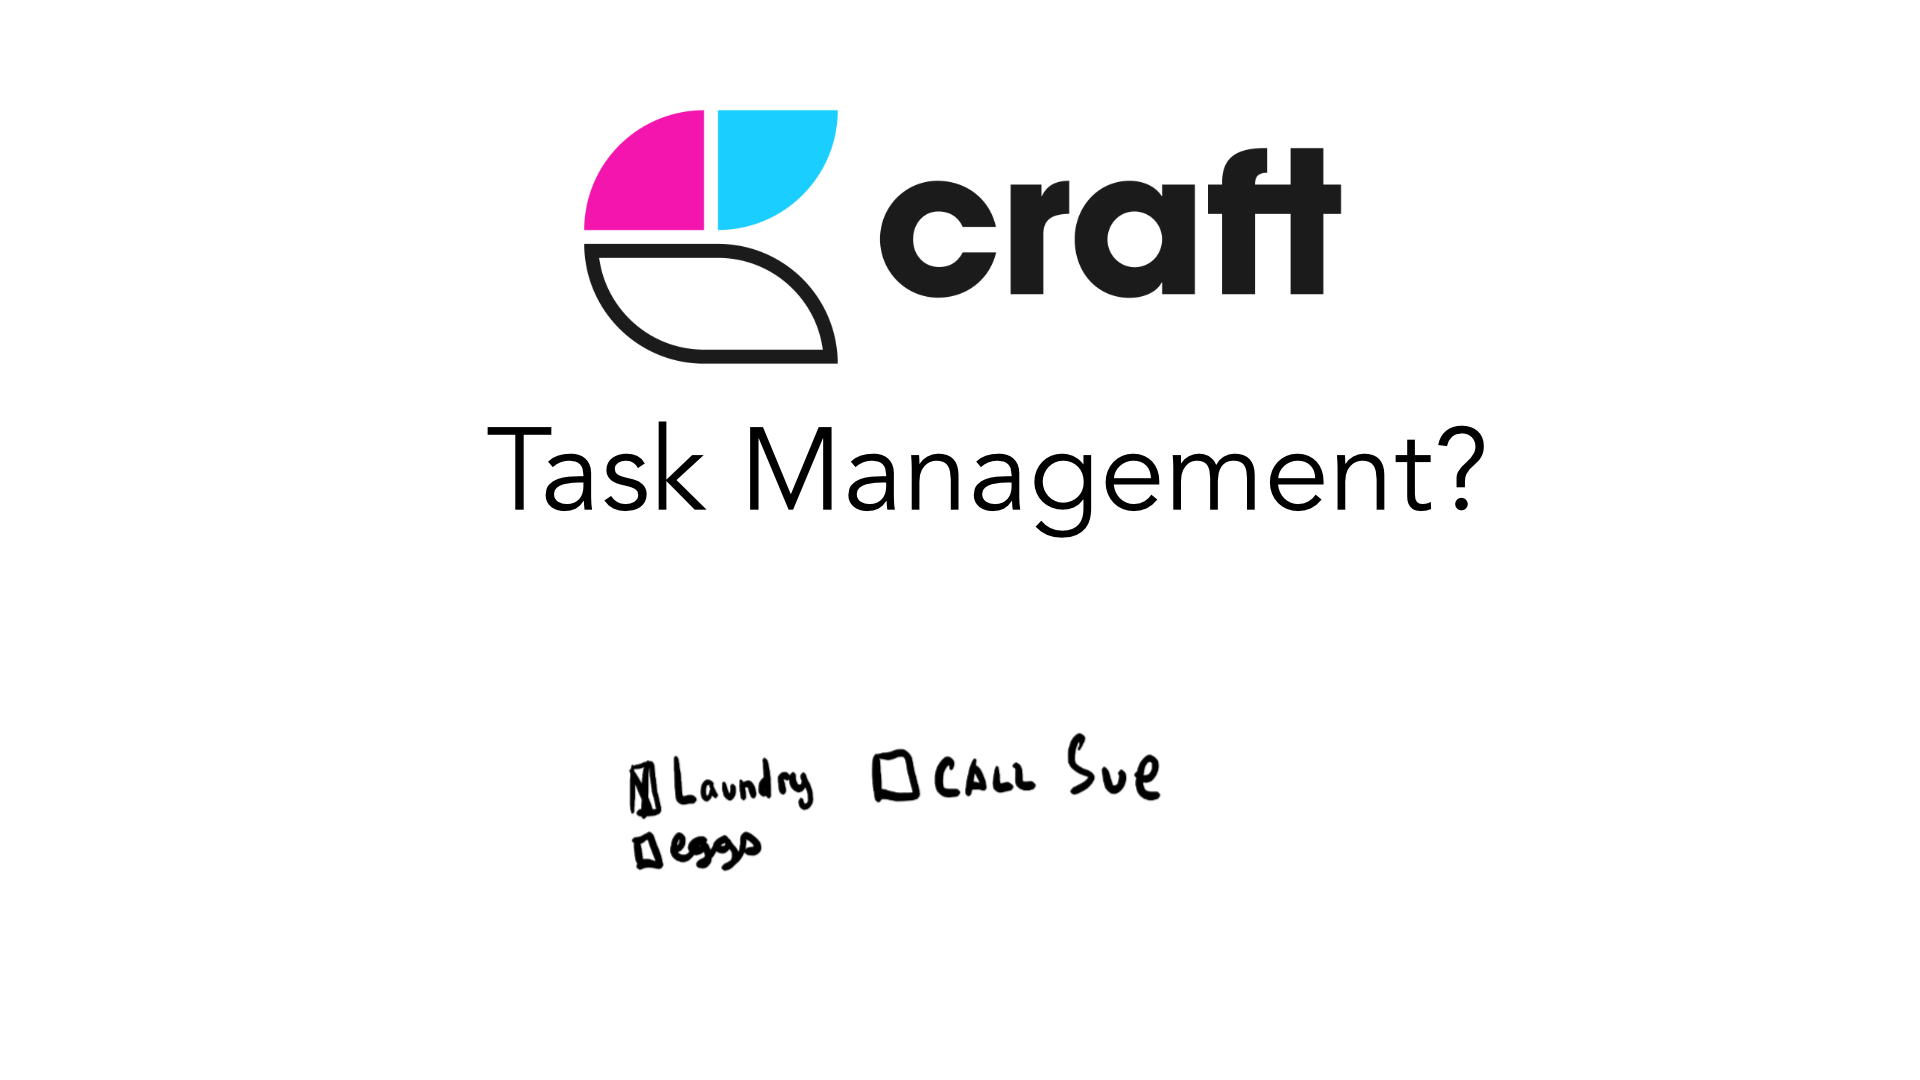 Should You Use Craft as a Task Manager?